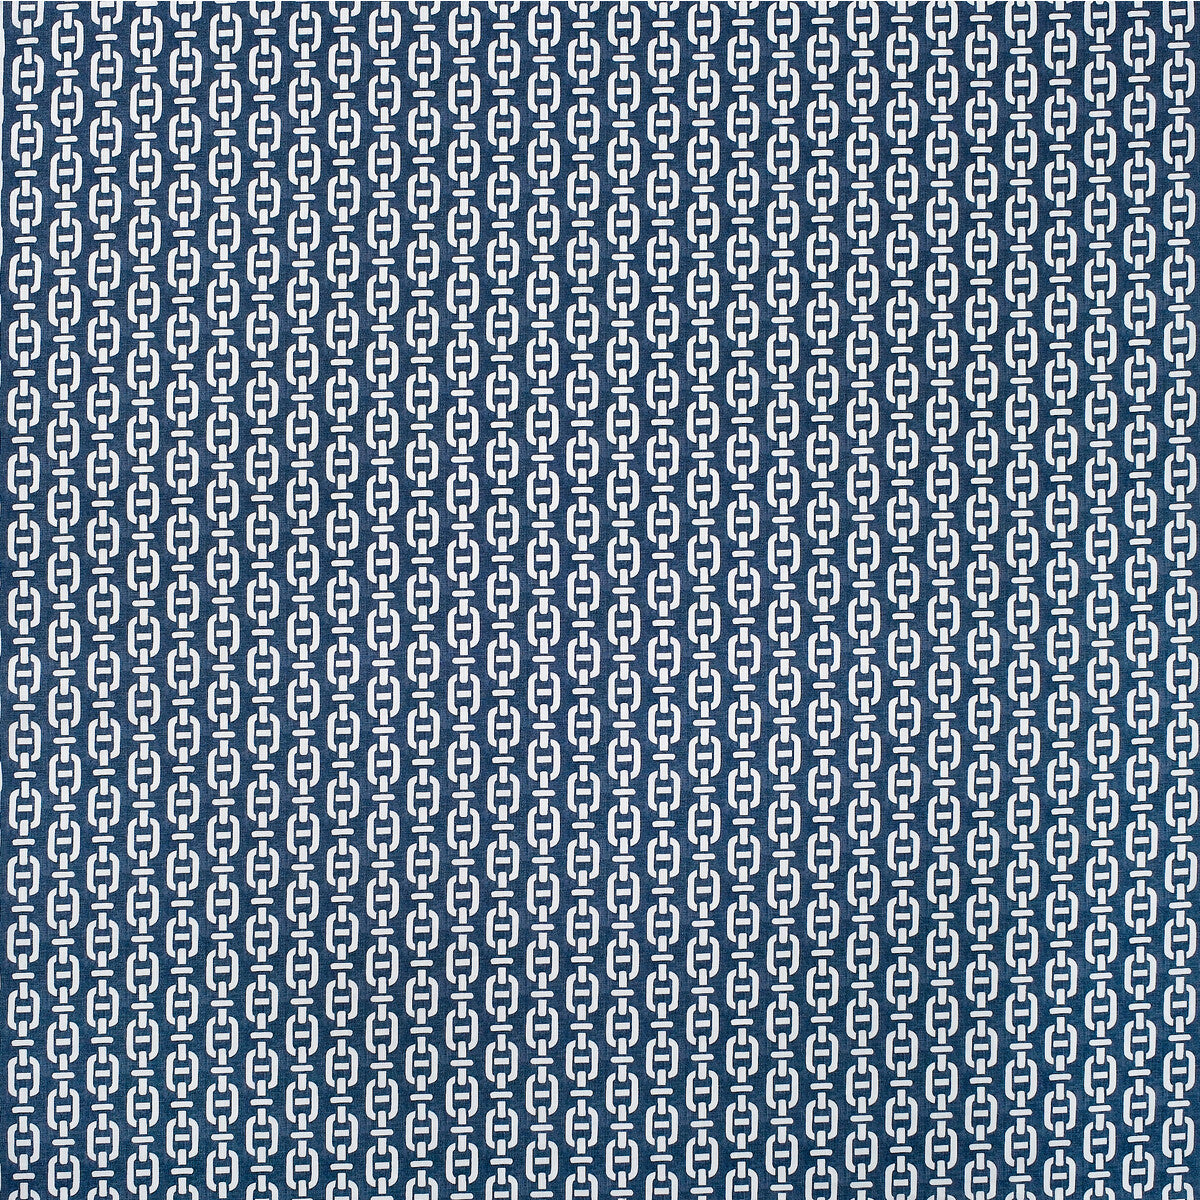 Burlington Outdoor fabric in navy color - pattern AM100387.550.0 - by Kravet Couture in the Andrew Martin Sophie Patterson Outdoor collection